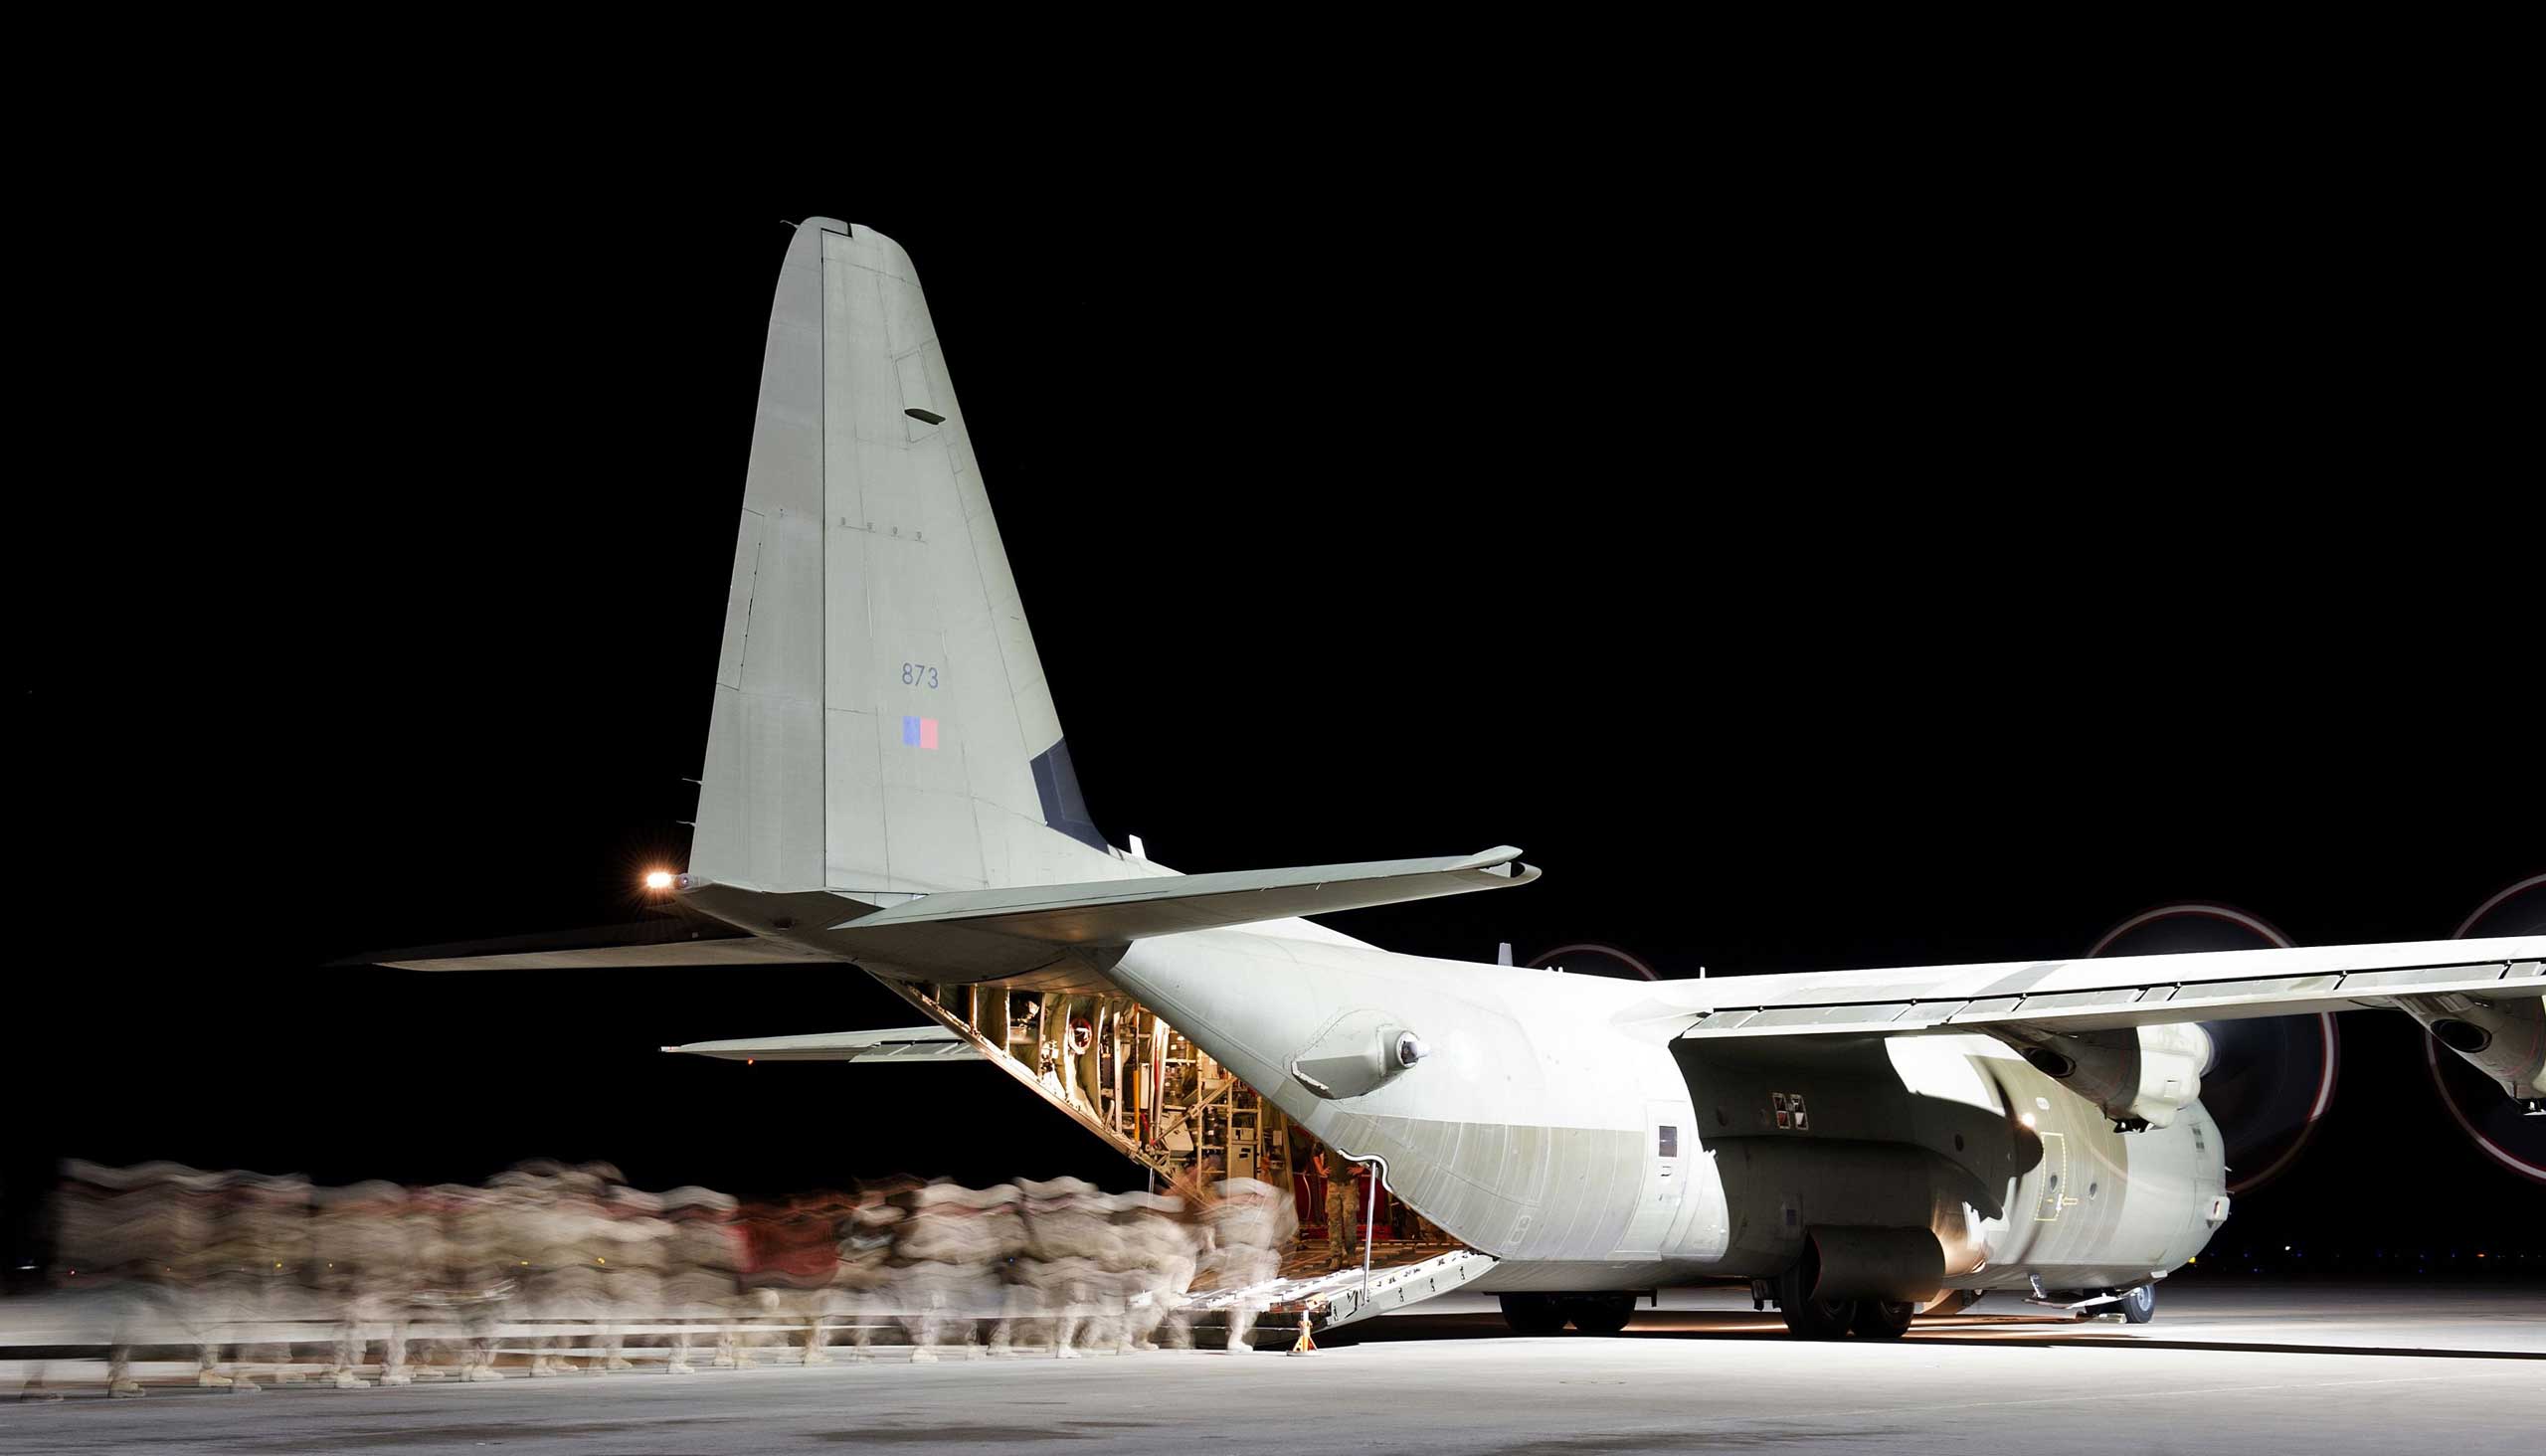 British troops are pictured leaving Camp Bastion for the final time in the back of a RAF Hercules transporter aircraft.
                              Final UK Troops Leave Helmand Province, Afghanistan, Oct 27, 2014